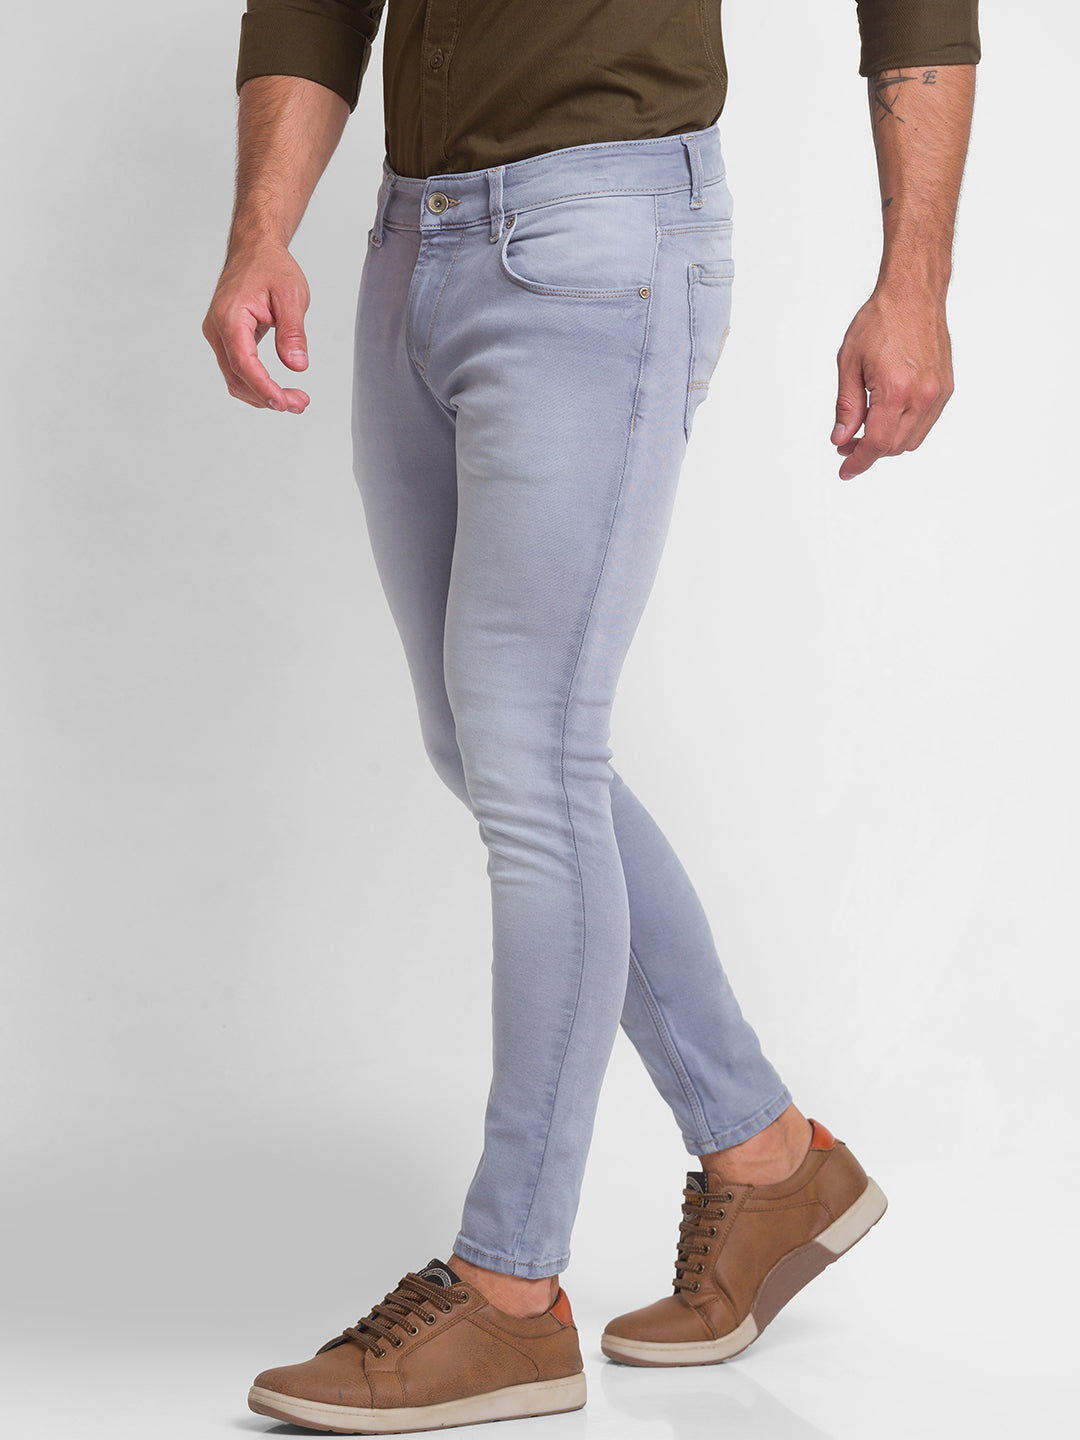 Spykar Ice Grey Cotton Slim Fit Tapered Length Jeans For Men (Kano)